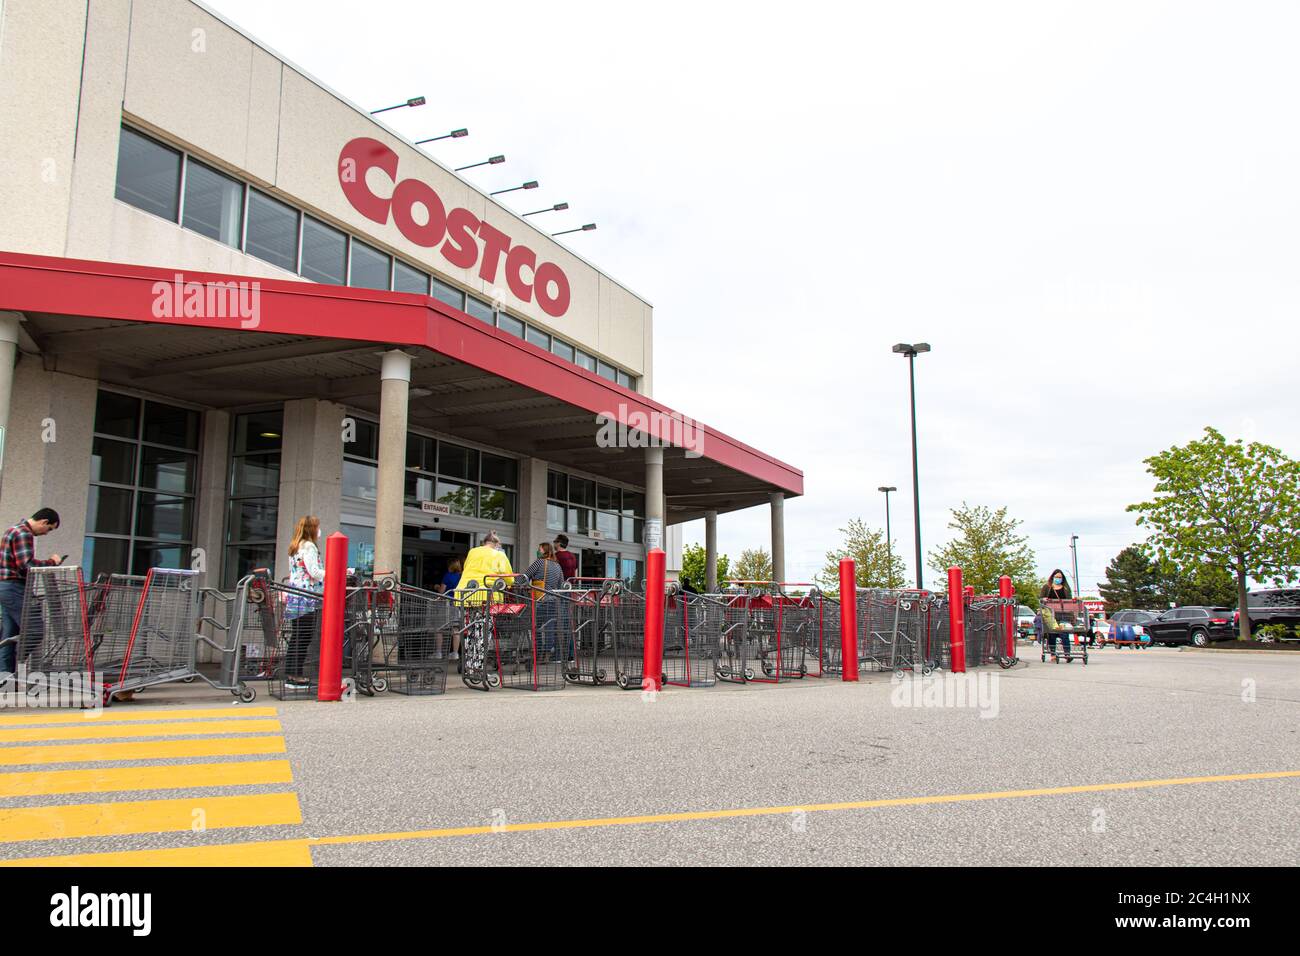 Customers wait in-line to enter a Costco Wholesale store, during strict protocols during the COVID-19 pandemic, Stock Photo